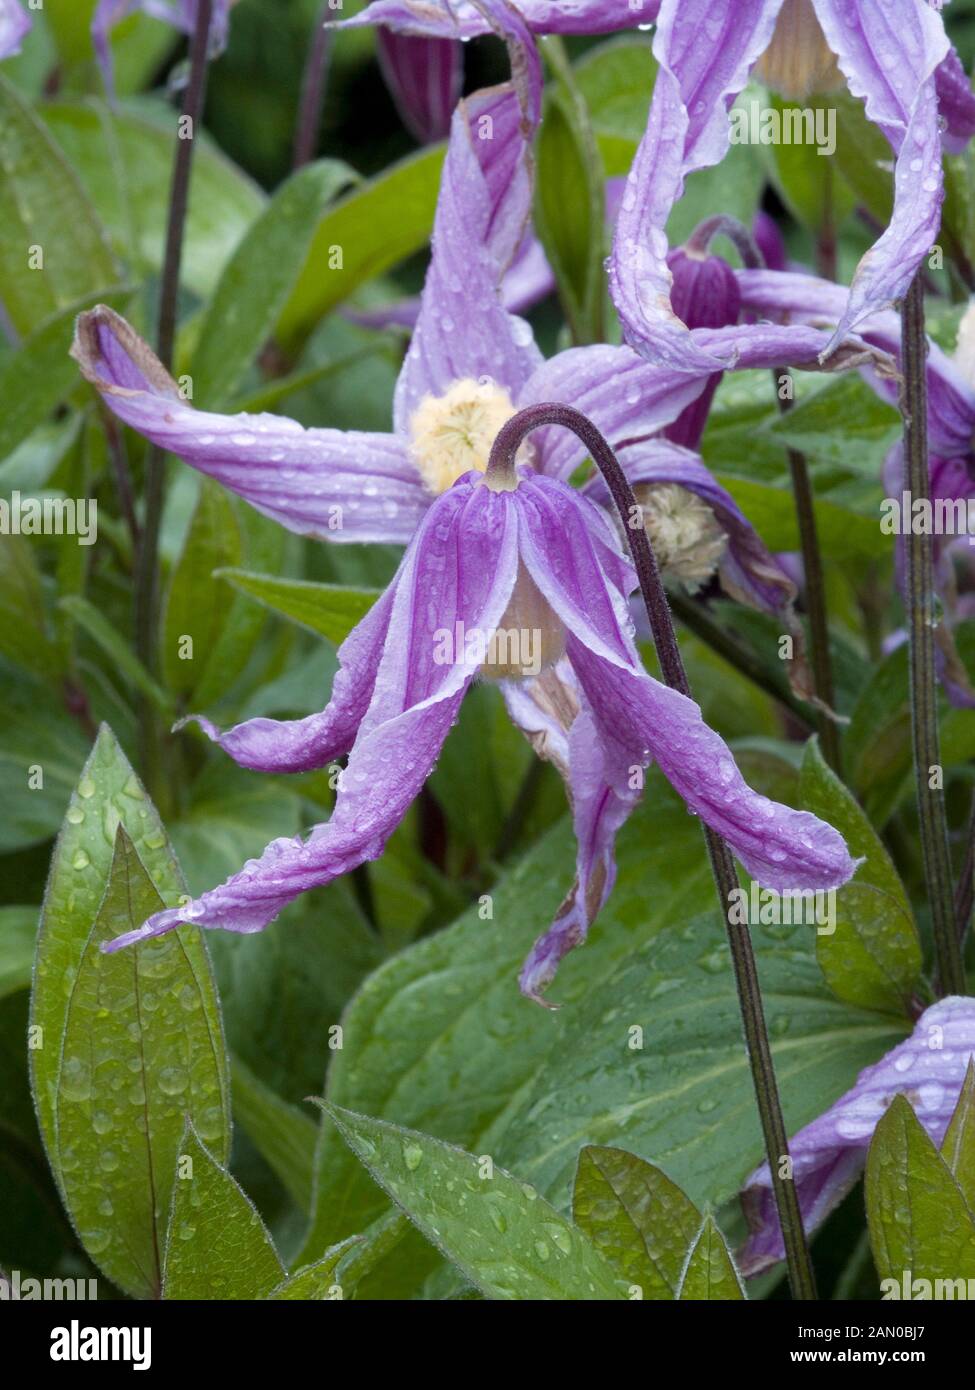 CLEMATIS INTEGRIFOLIA ROSE COLORED GLASSES Stock Photo